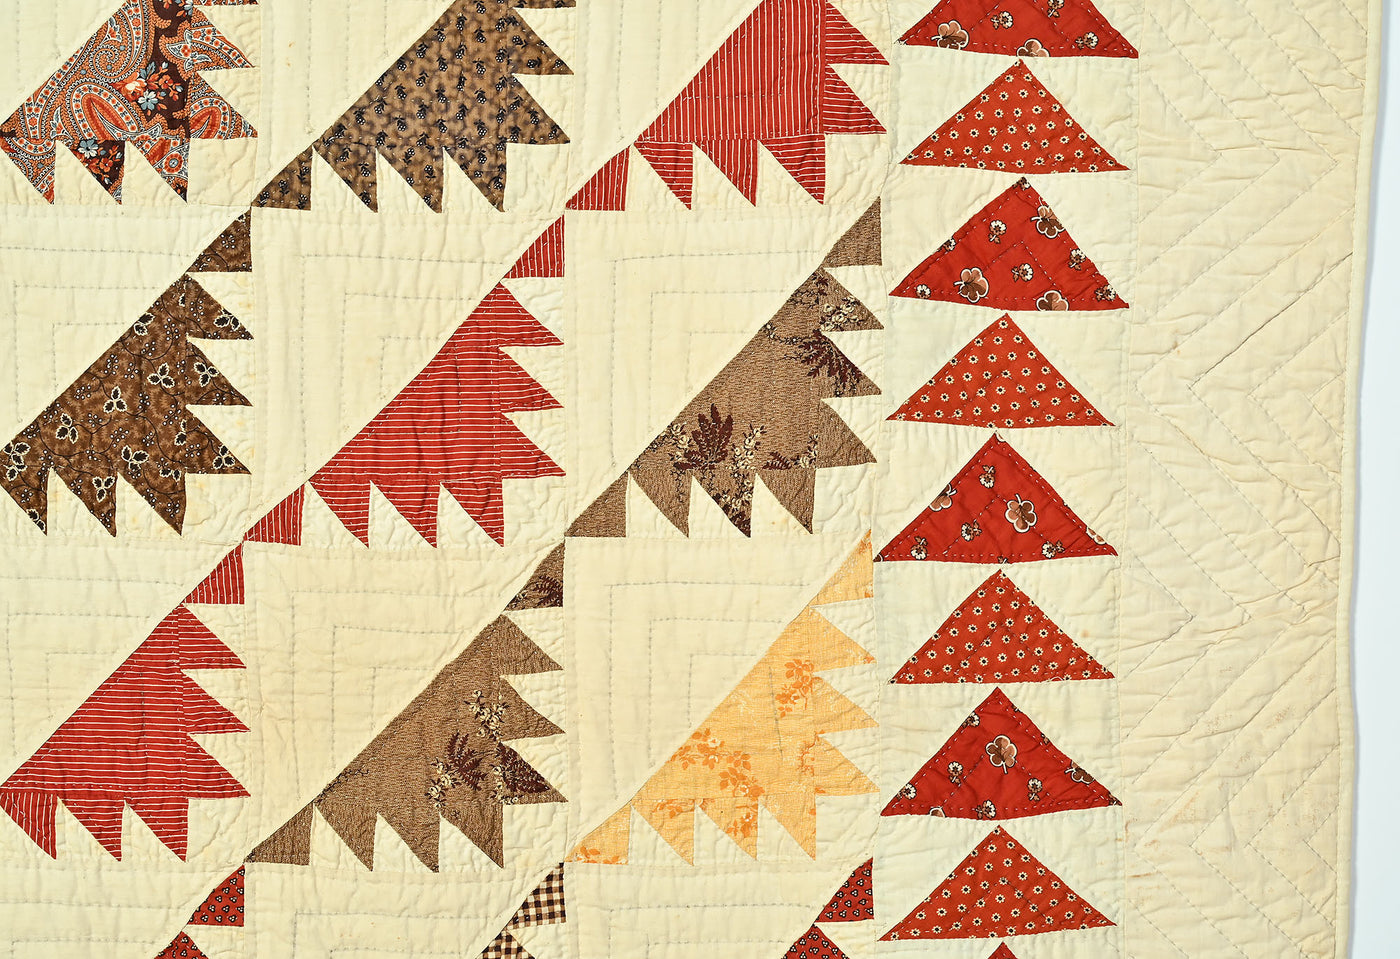 Sawtooth Quilt with Wild Goose Chase Border